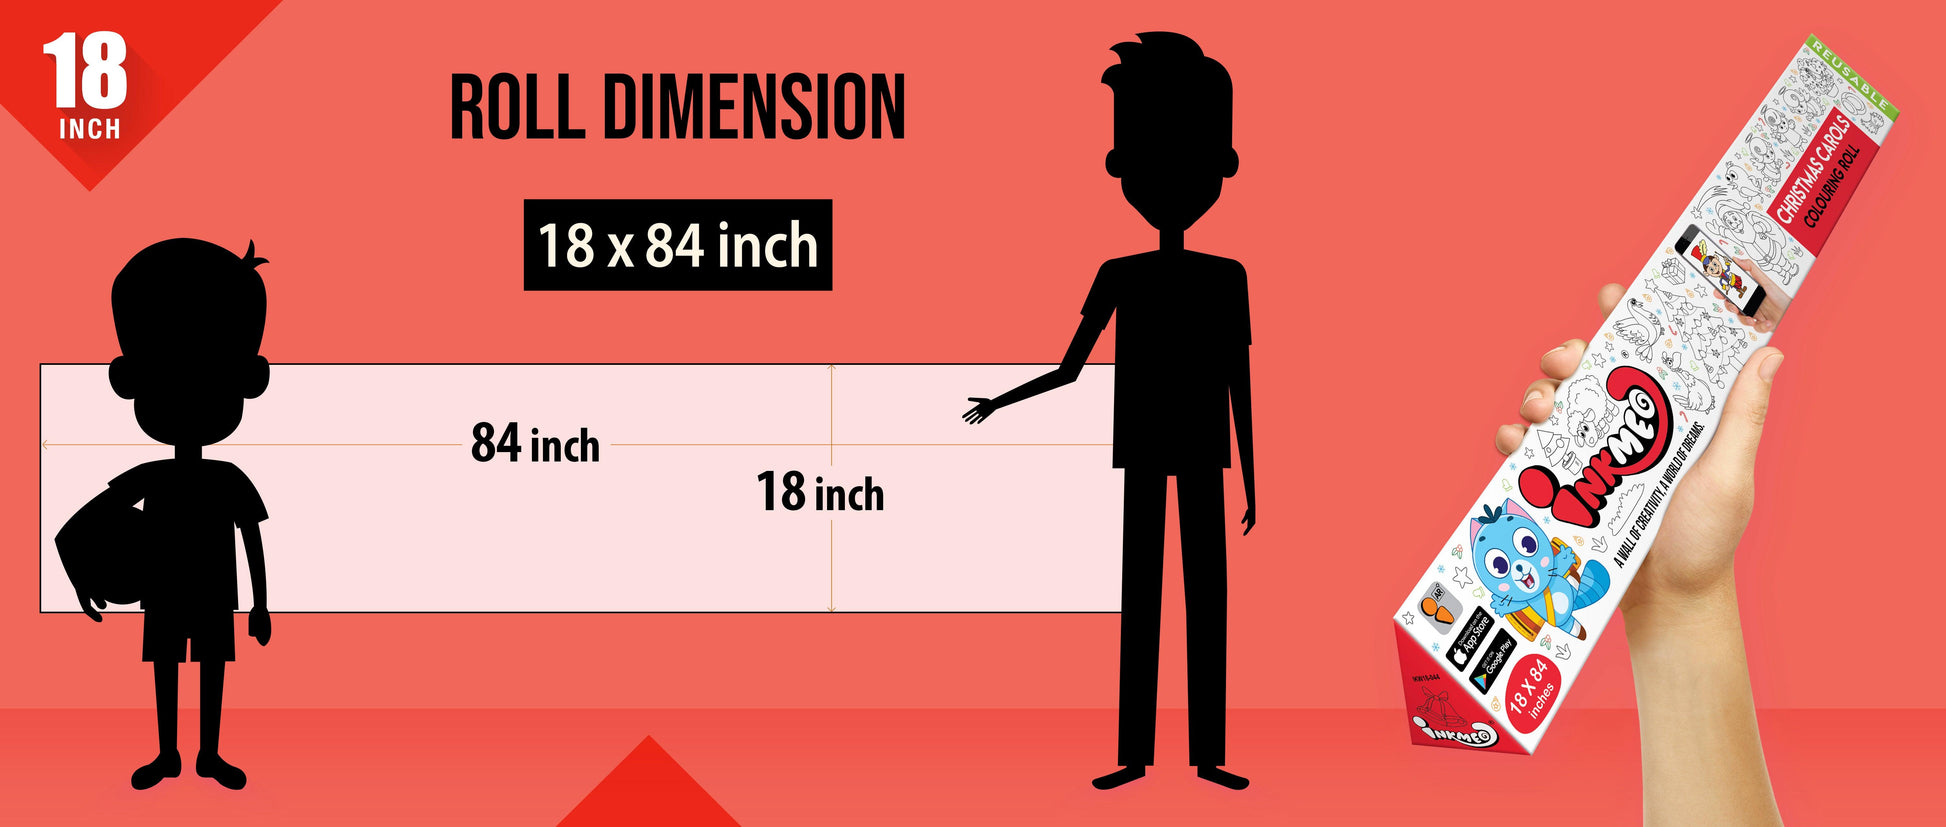 The image shows a red background with a ruler indicating child and adult height on an 18*84 inch paper roll dimension.